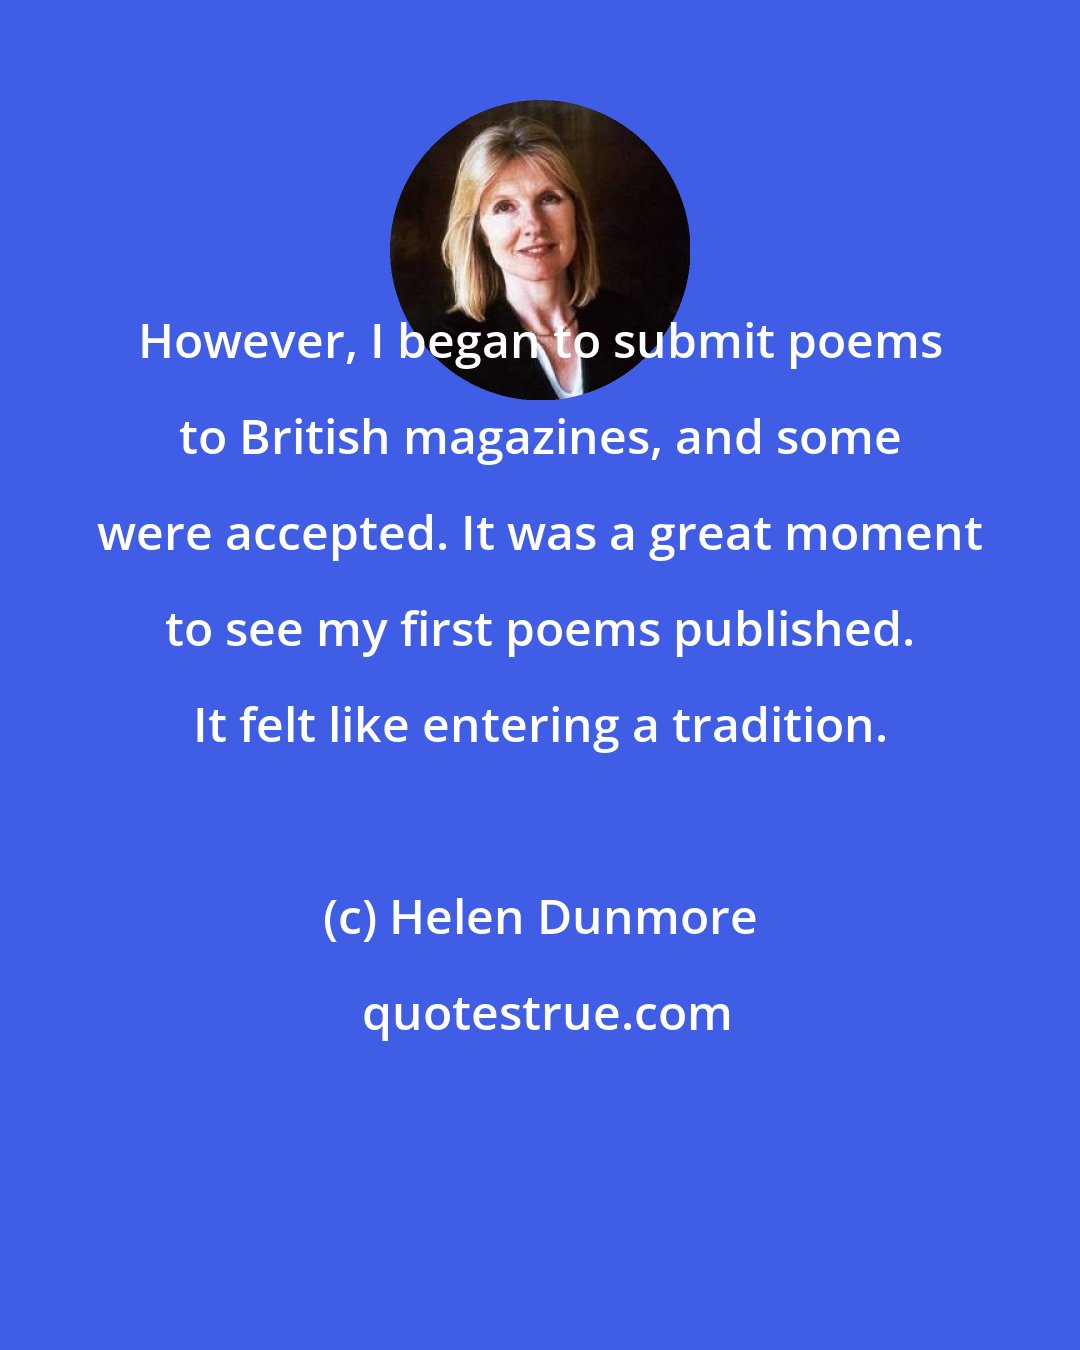 Helen Dunmore: However, I began to submit poems to British magazines, and some were accepted. It was a great moment to see my first poems published. It felt like entering a tradition.